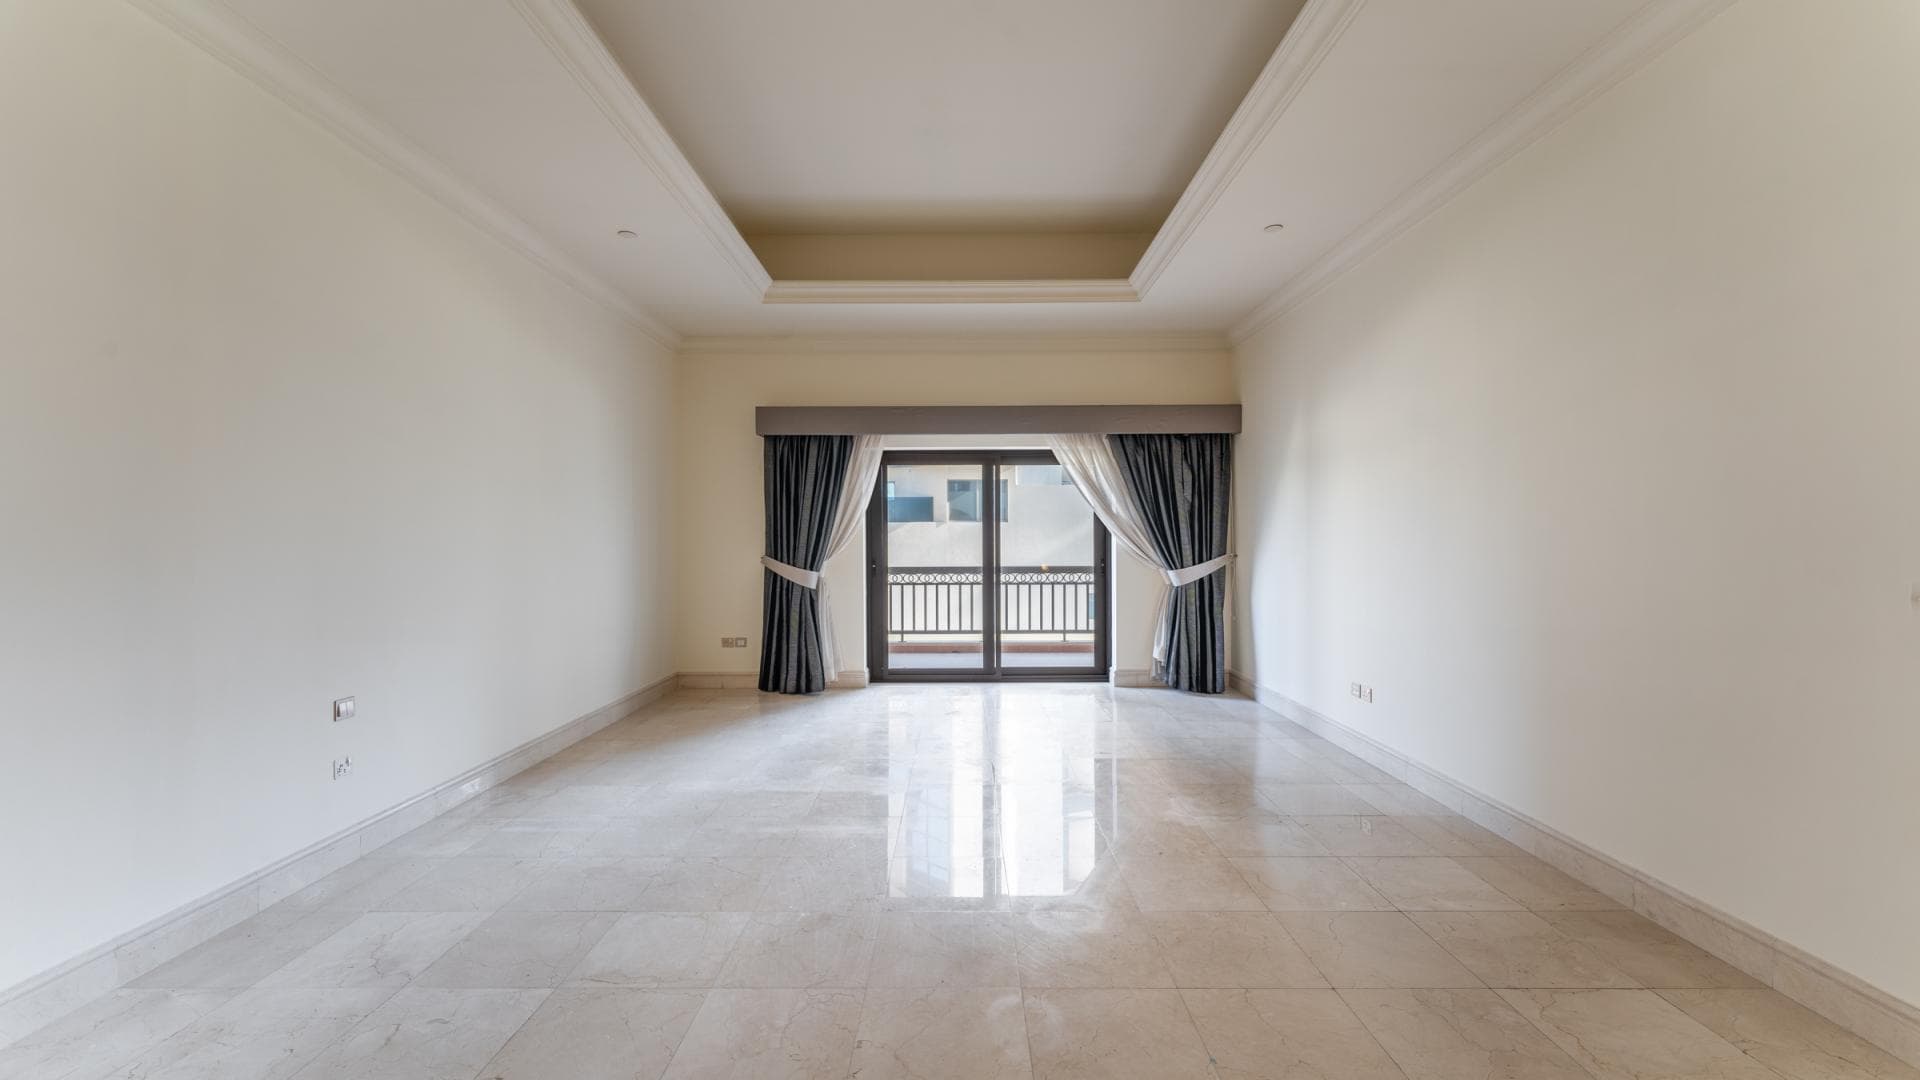 3 Bedroom Townhouse For Sale Al Ramth 33 Lp38448 F4a5a2fea67ae00.jpg